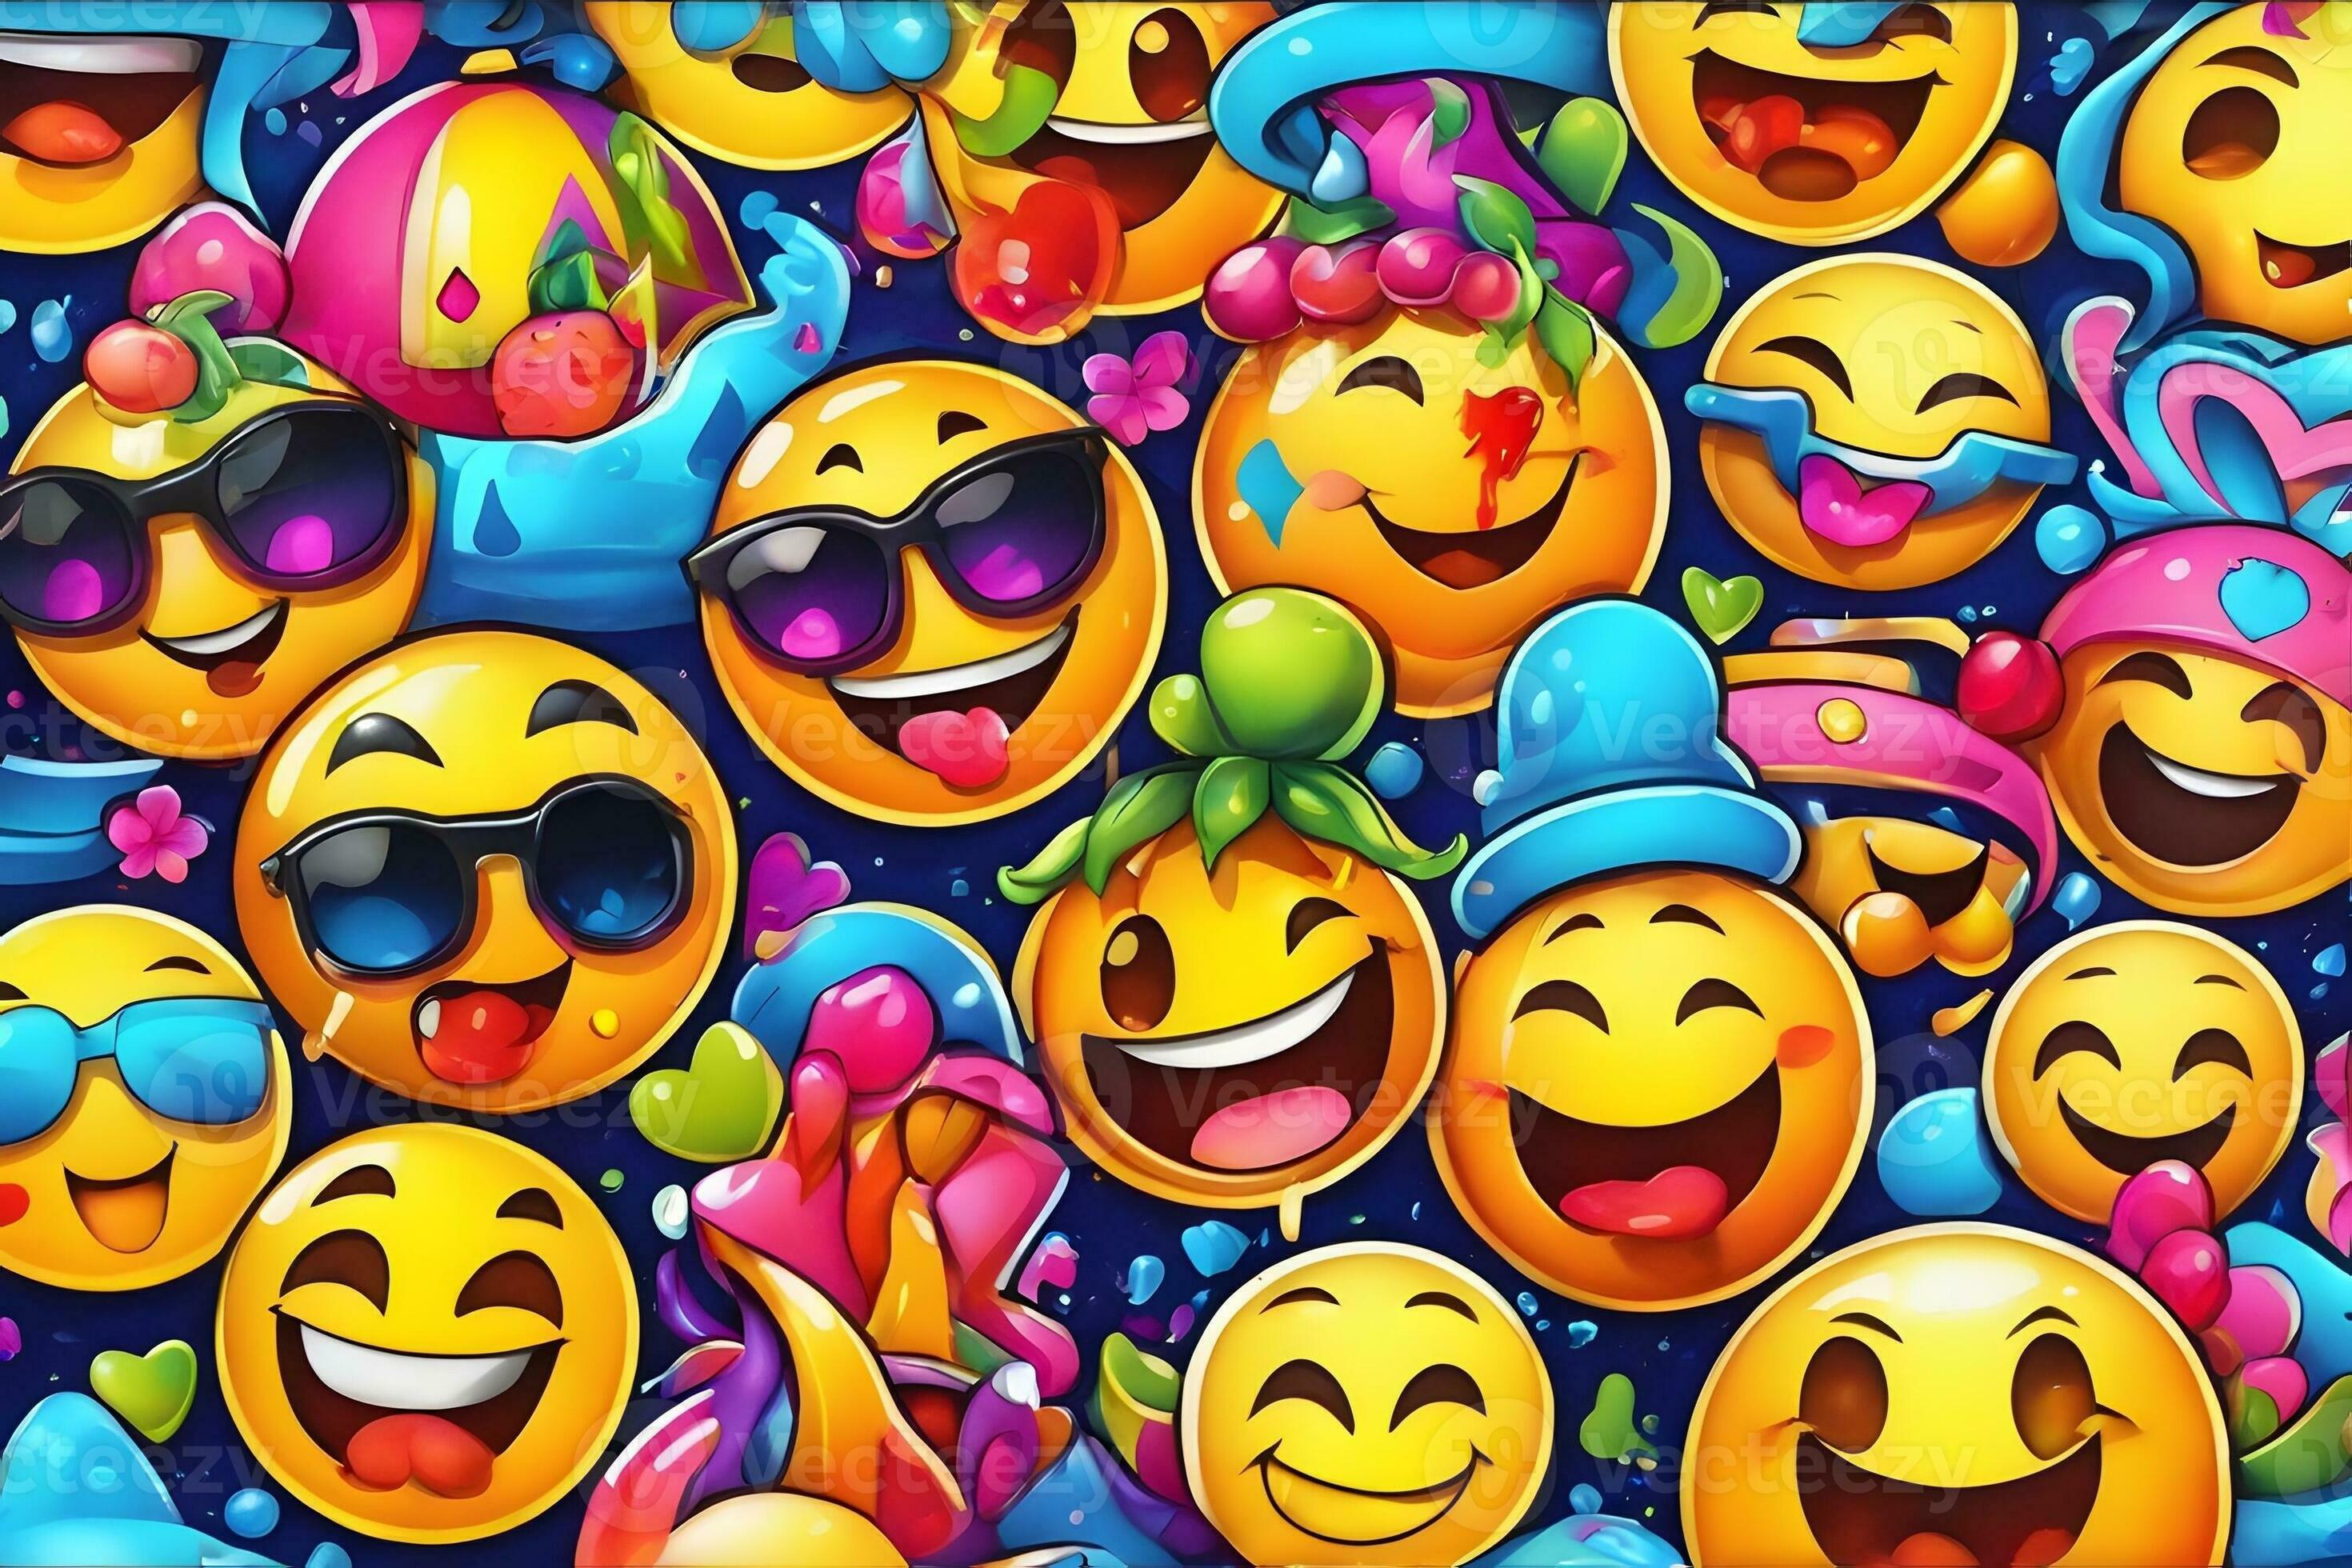 Emoji Wallpaper - Cute Backgrounds:Amazon.co.uk:Appstore for Android-sgquangbinhtourist.com.vn